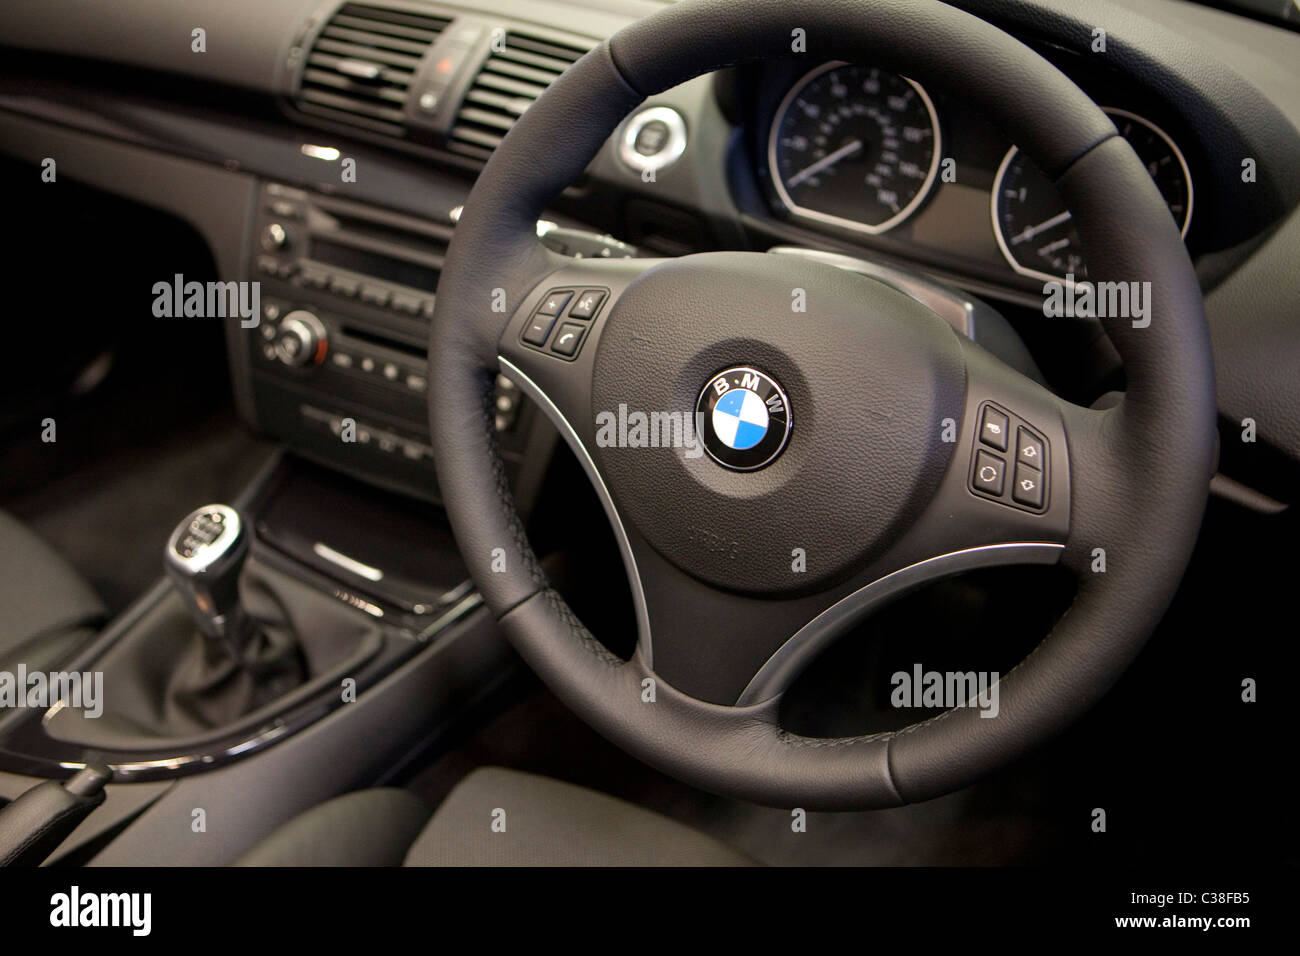 Interior Of The Bmw 5 Series Gt Stock Photo 36452393 Alamy